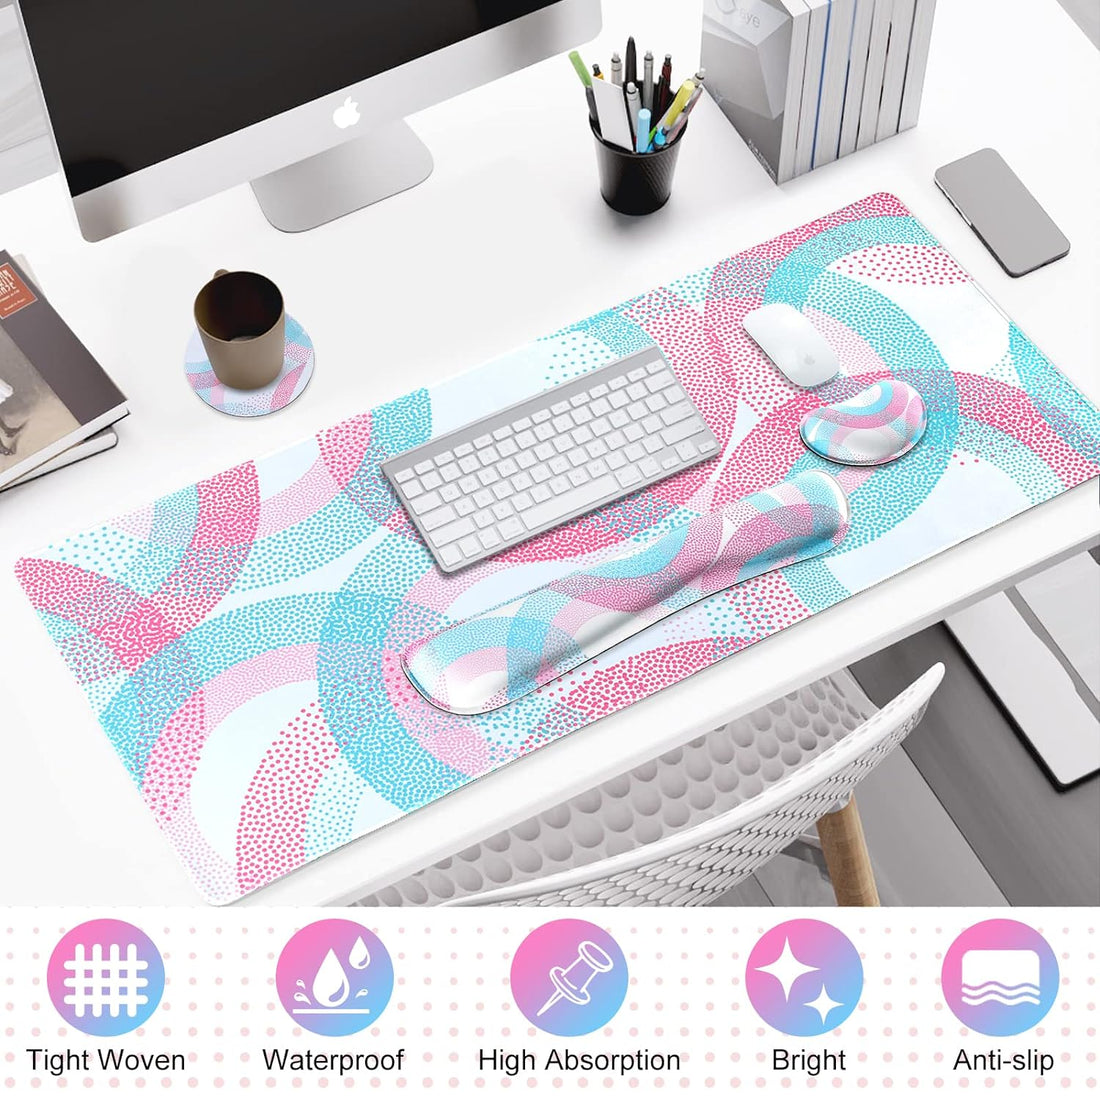 Large Gaming Mouse Pad,4in1 Extended Mousepad Set,Desk Pad+Keyboard Wrist Rest Pad+Mouse Mat with Wrist Support+Coaster,Waterproof Desk Mat Protector for Home Office Laptop Computer-Colorful Circle